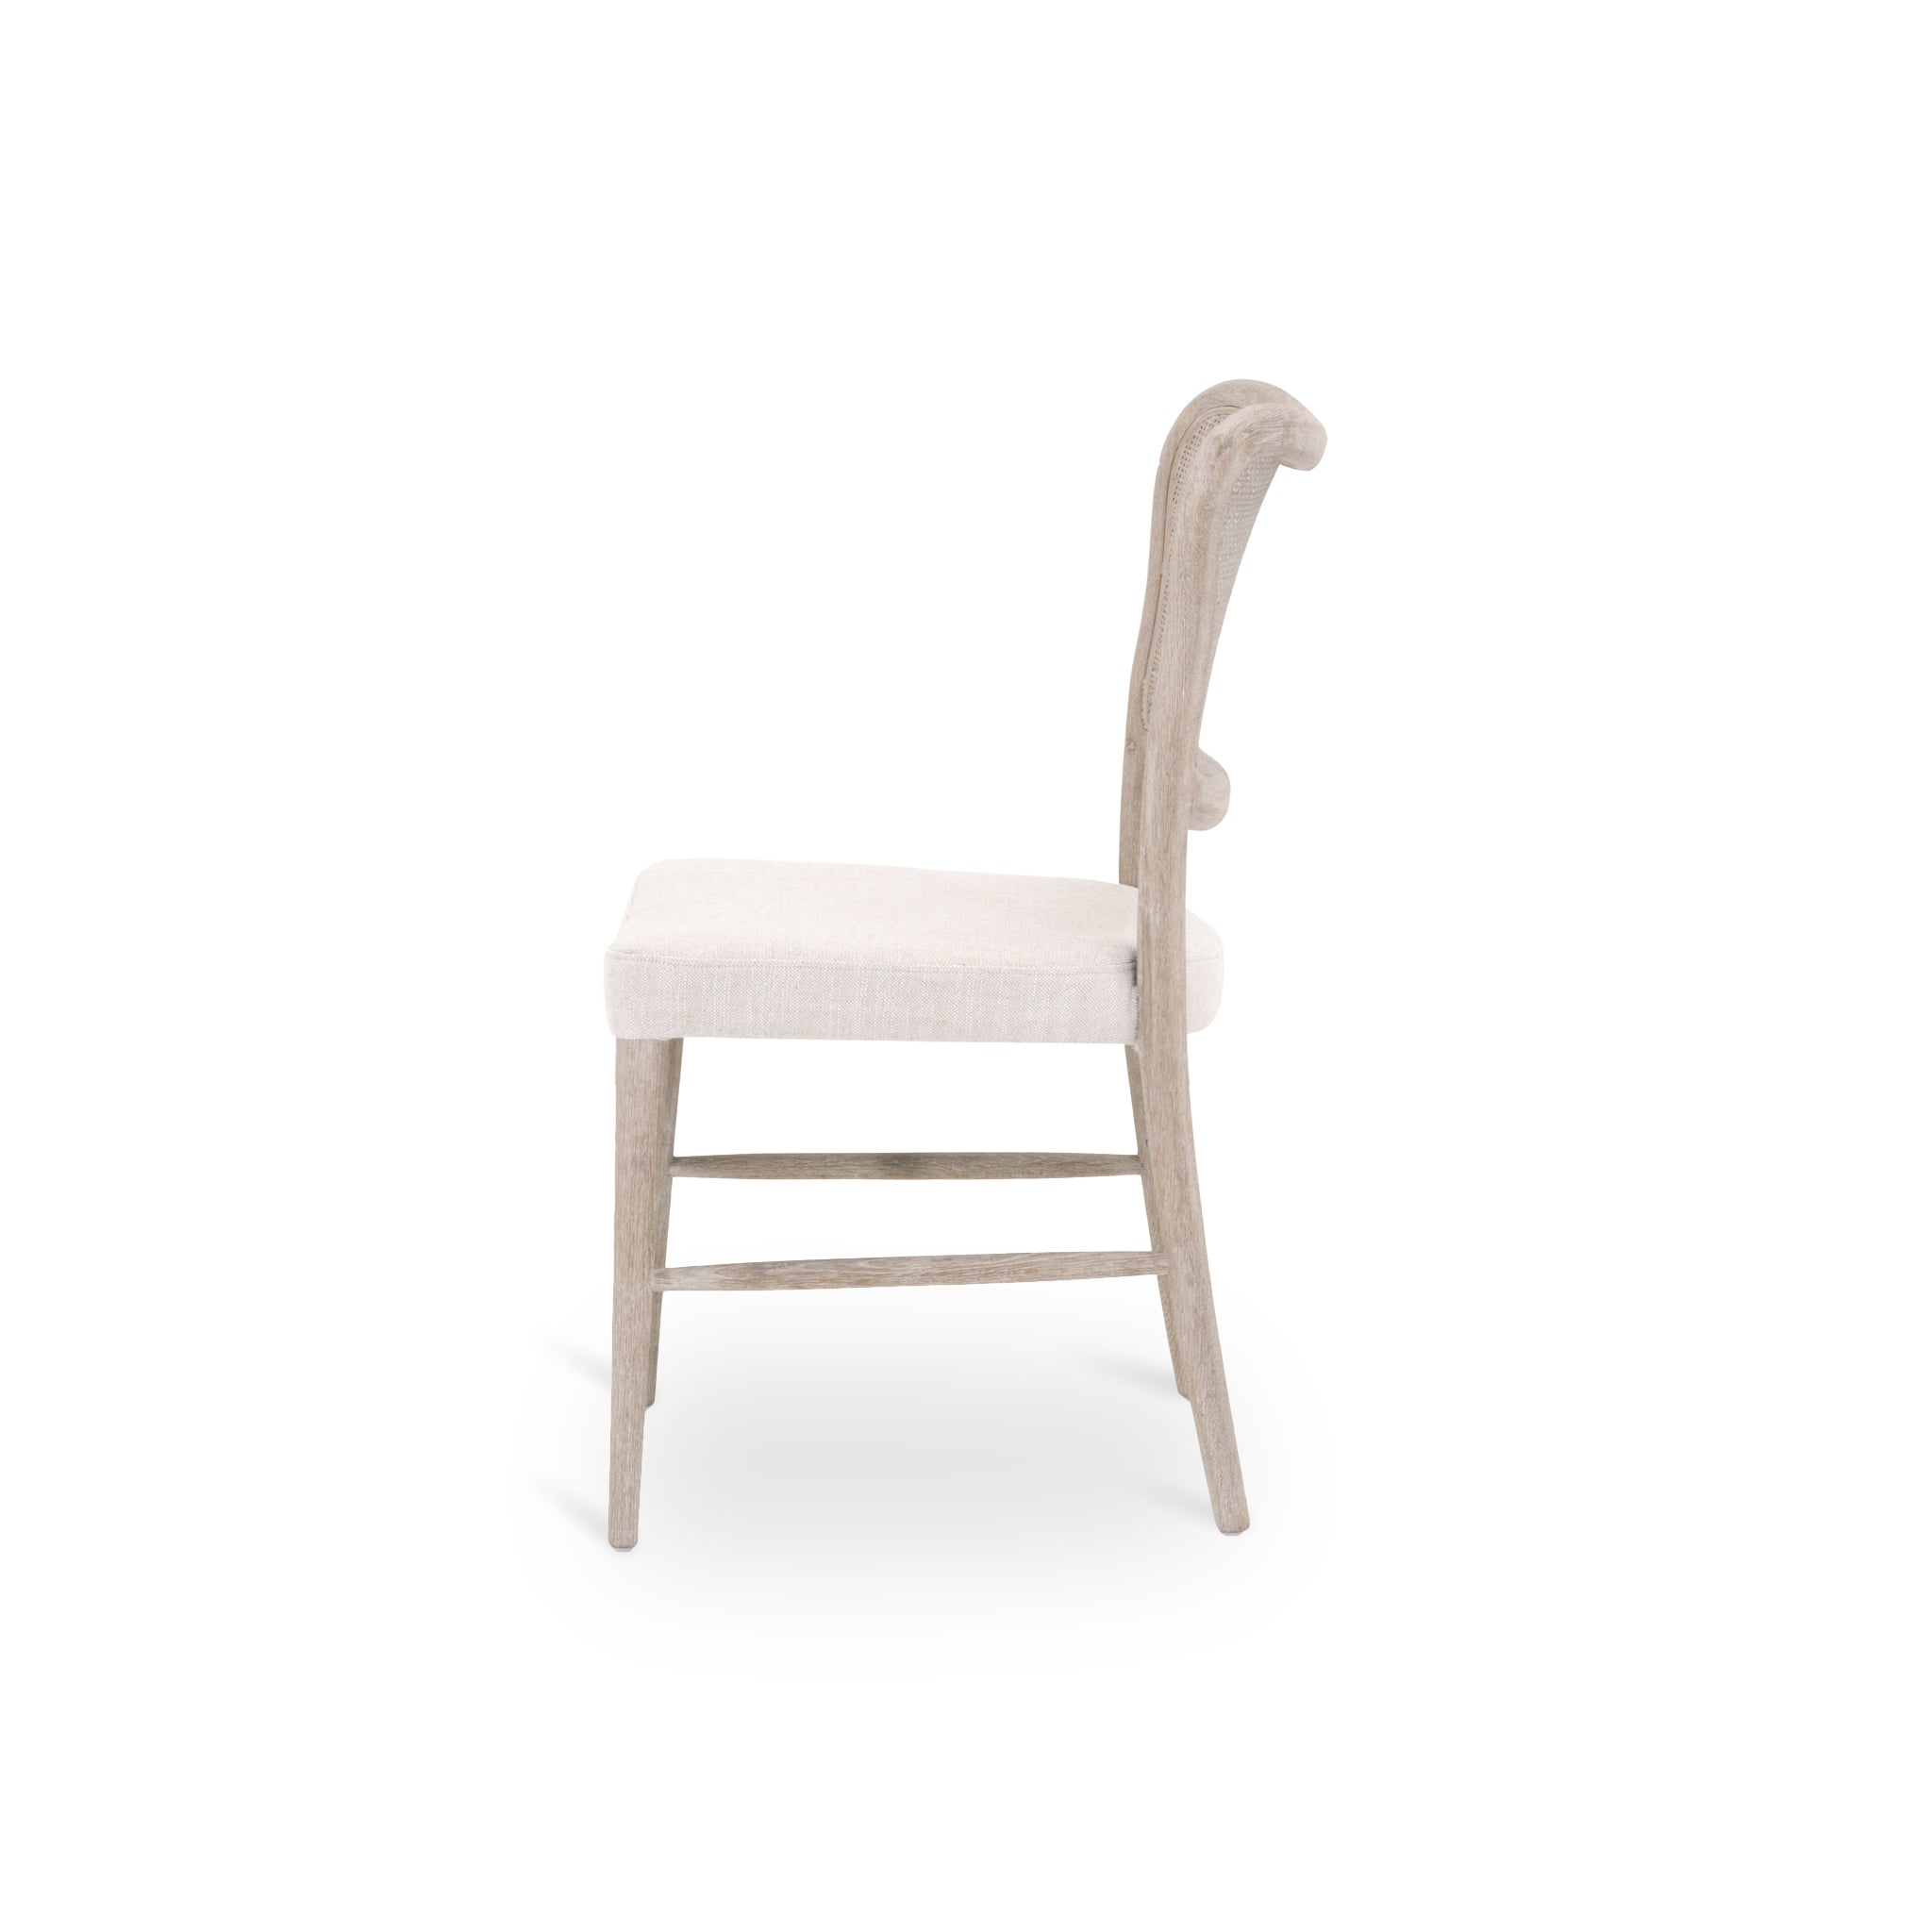 Oberwil Dining Chair - Set of 2